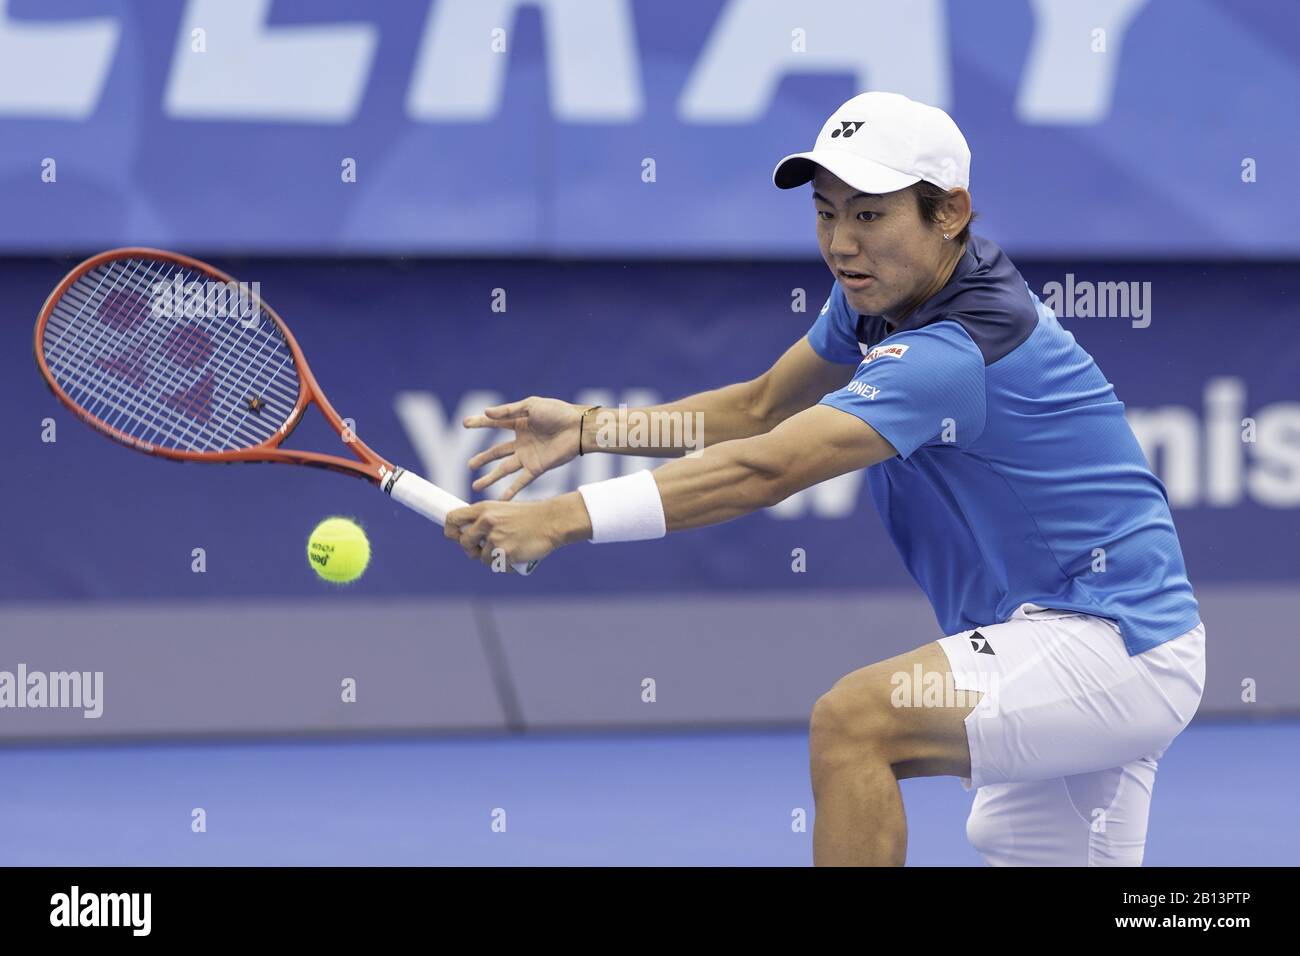 February 22, 2020, Delray Beach, Florida, United States: FEBRUARY 22 - Delray Beach: Yoshihito Nishioka(JPN) in action here defeats Ugo Humbert(FRA) in 3 sets to make the finals at the 2020 Delray Beach Open by Vitacost.com in Delray Beach, Florida.(Photo credit: Andrew Patron/Zuma Press Newswire) (Credit Image: © Andrew Patron/ZUMA Wire) Stock Photo